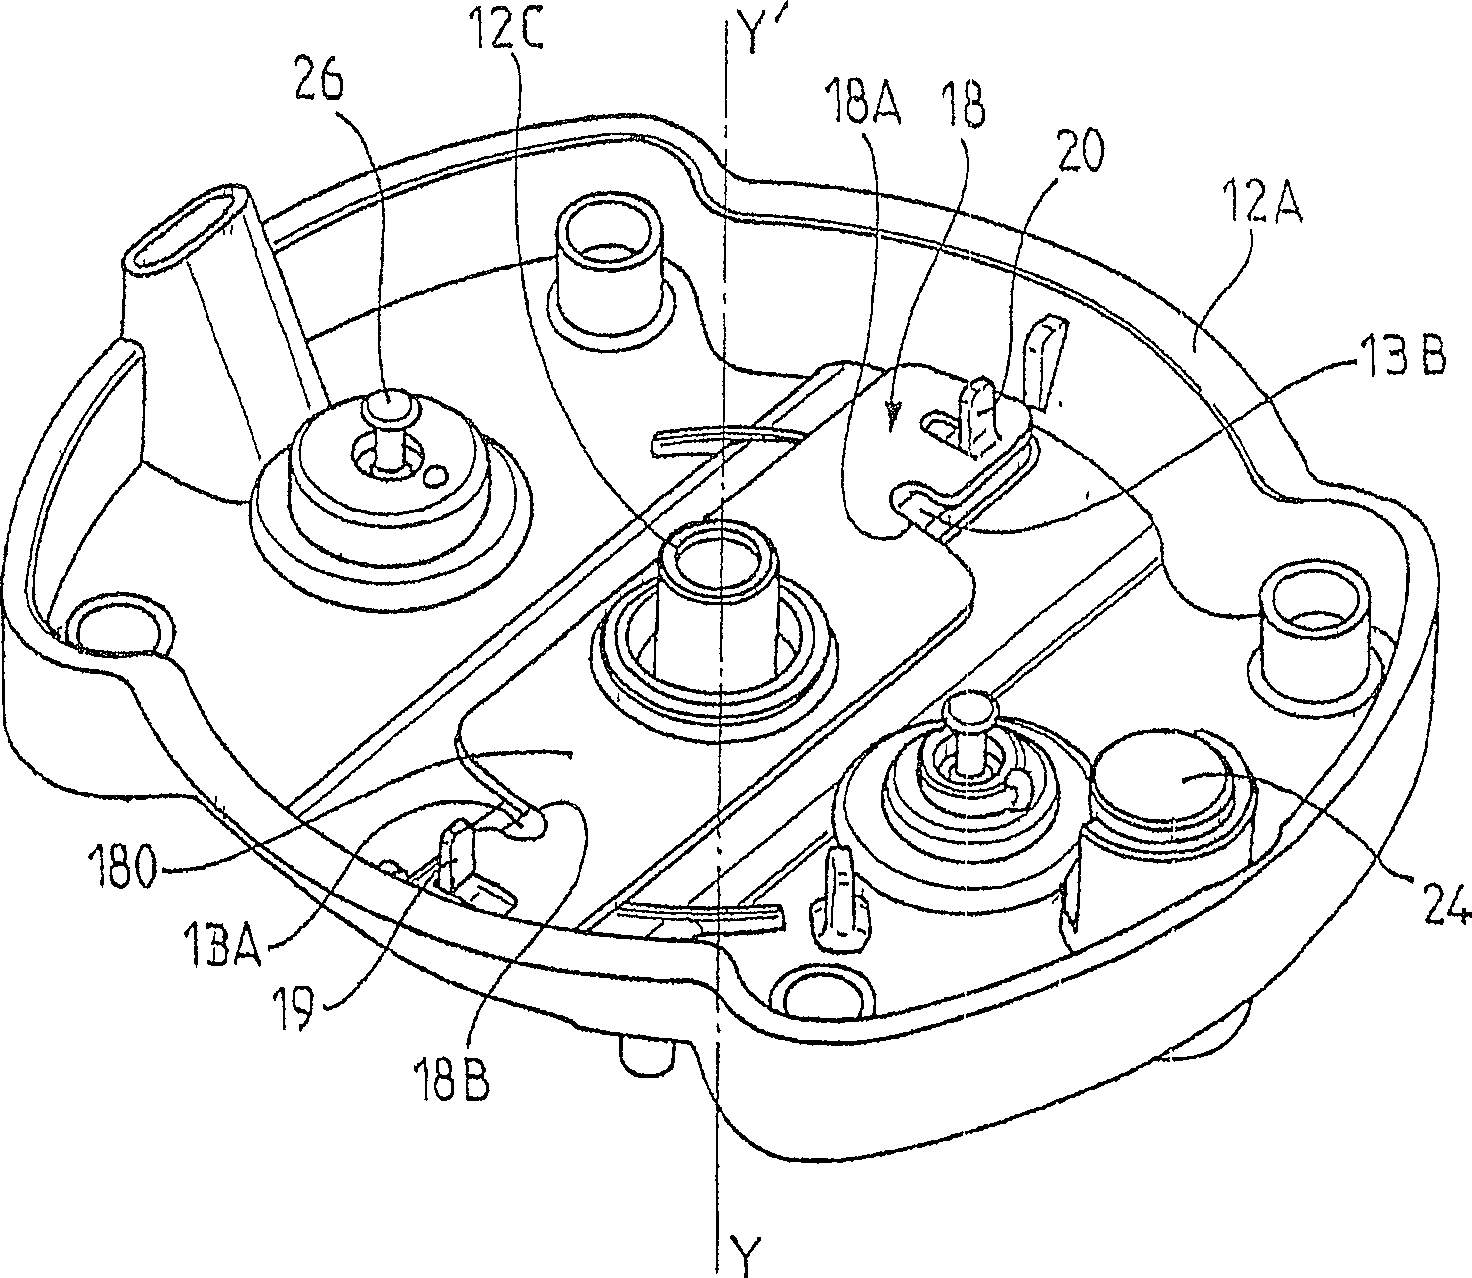 Pressure cooking appliance with improved safety system